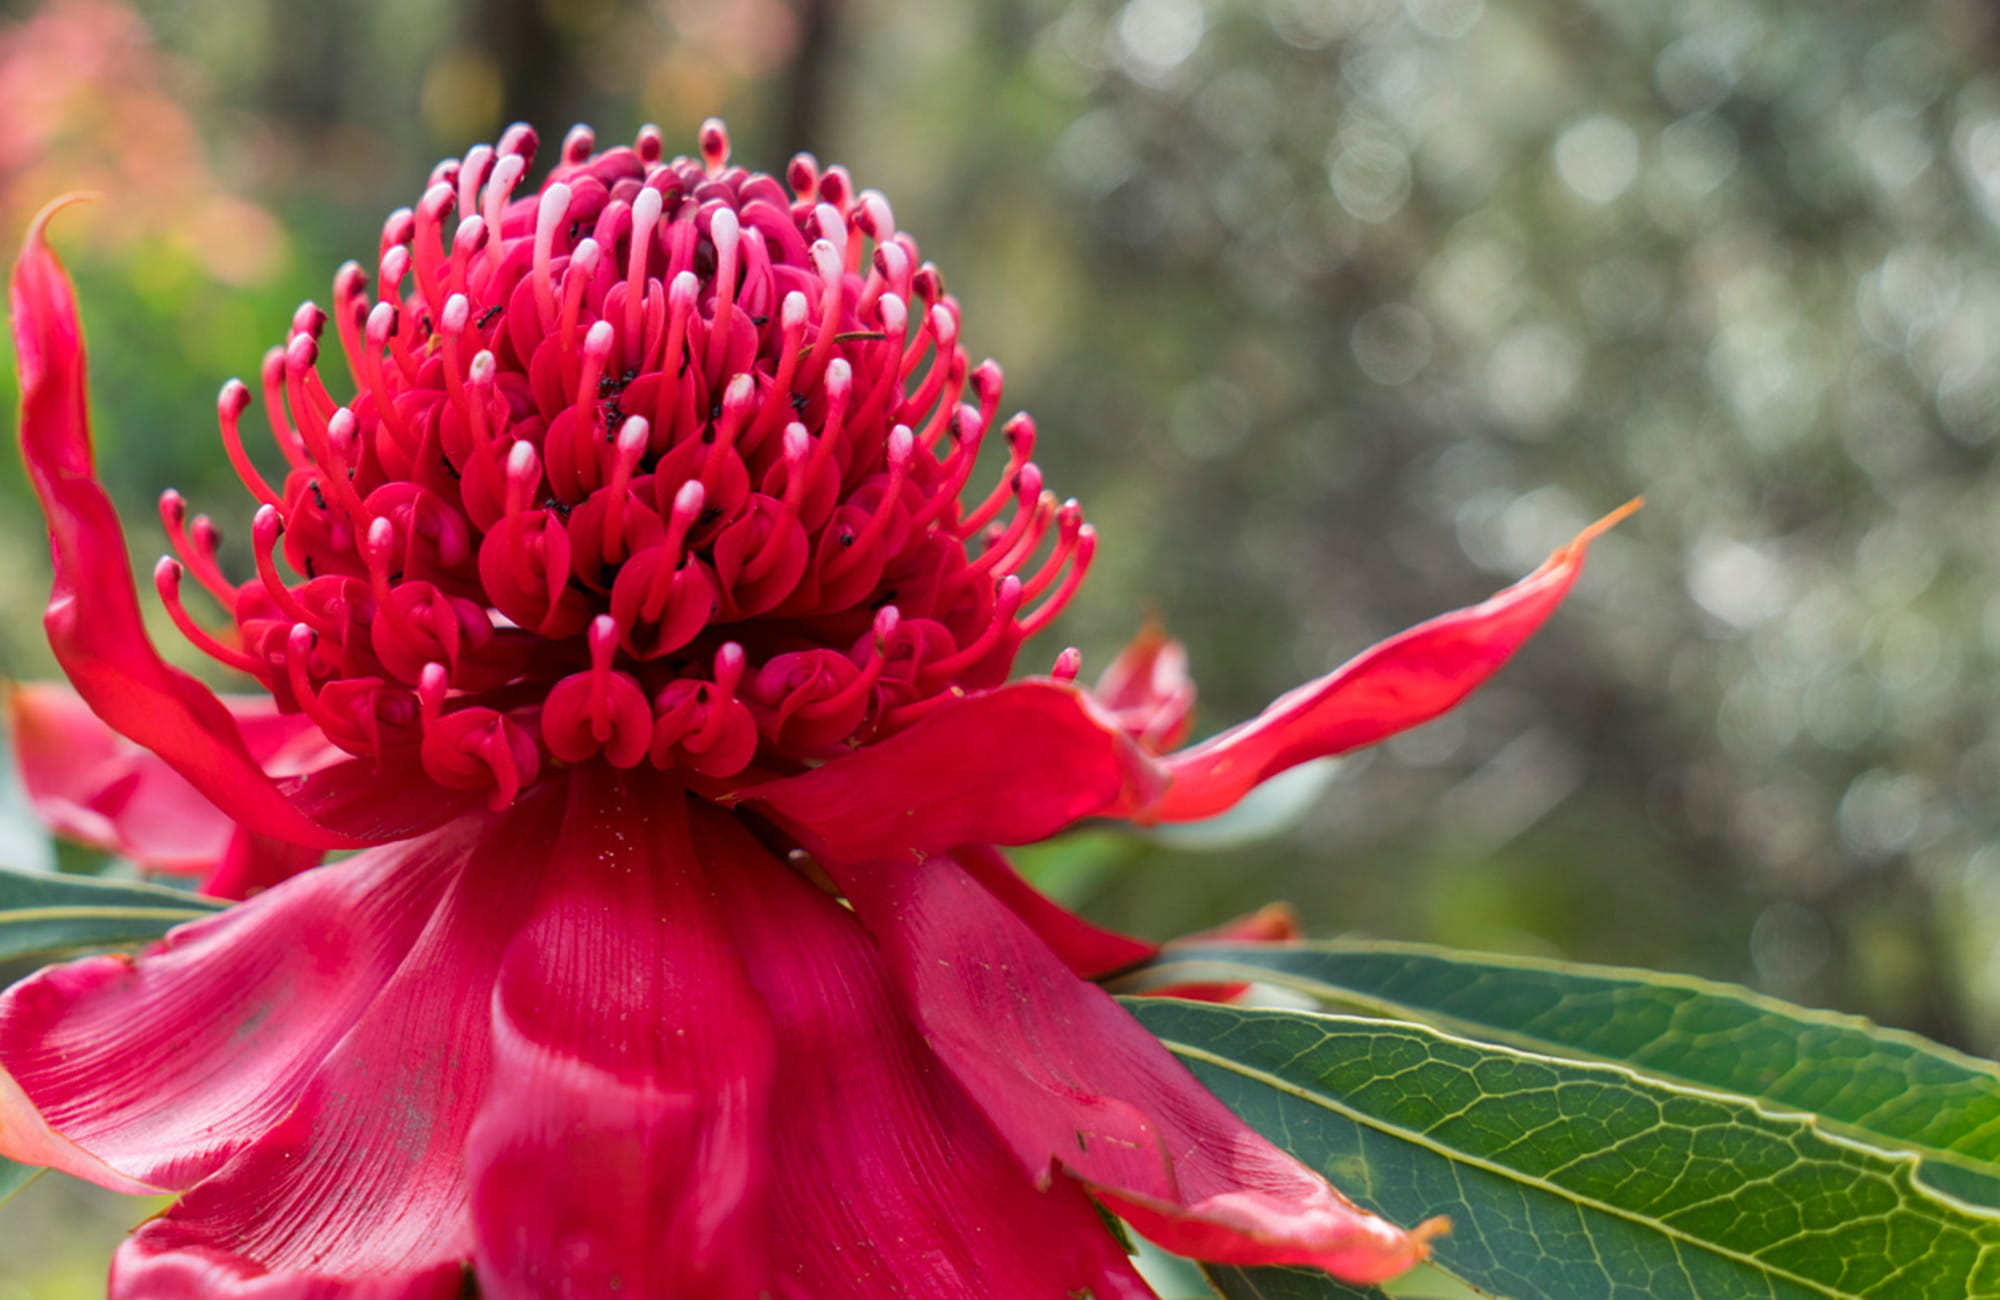 Waratah in bloom, Blue Mountains National Park. Photo: Simone Cottrell/OEH.